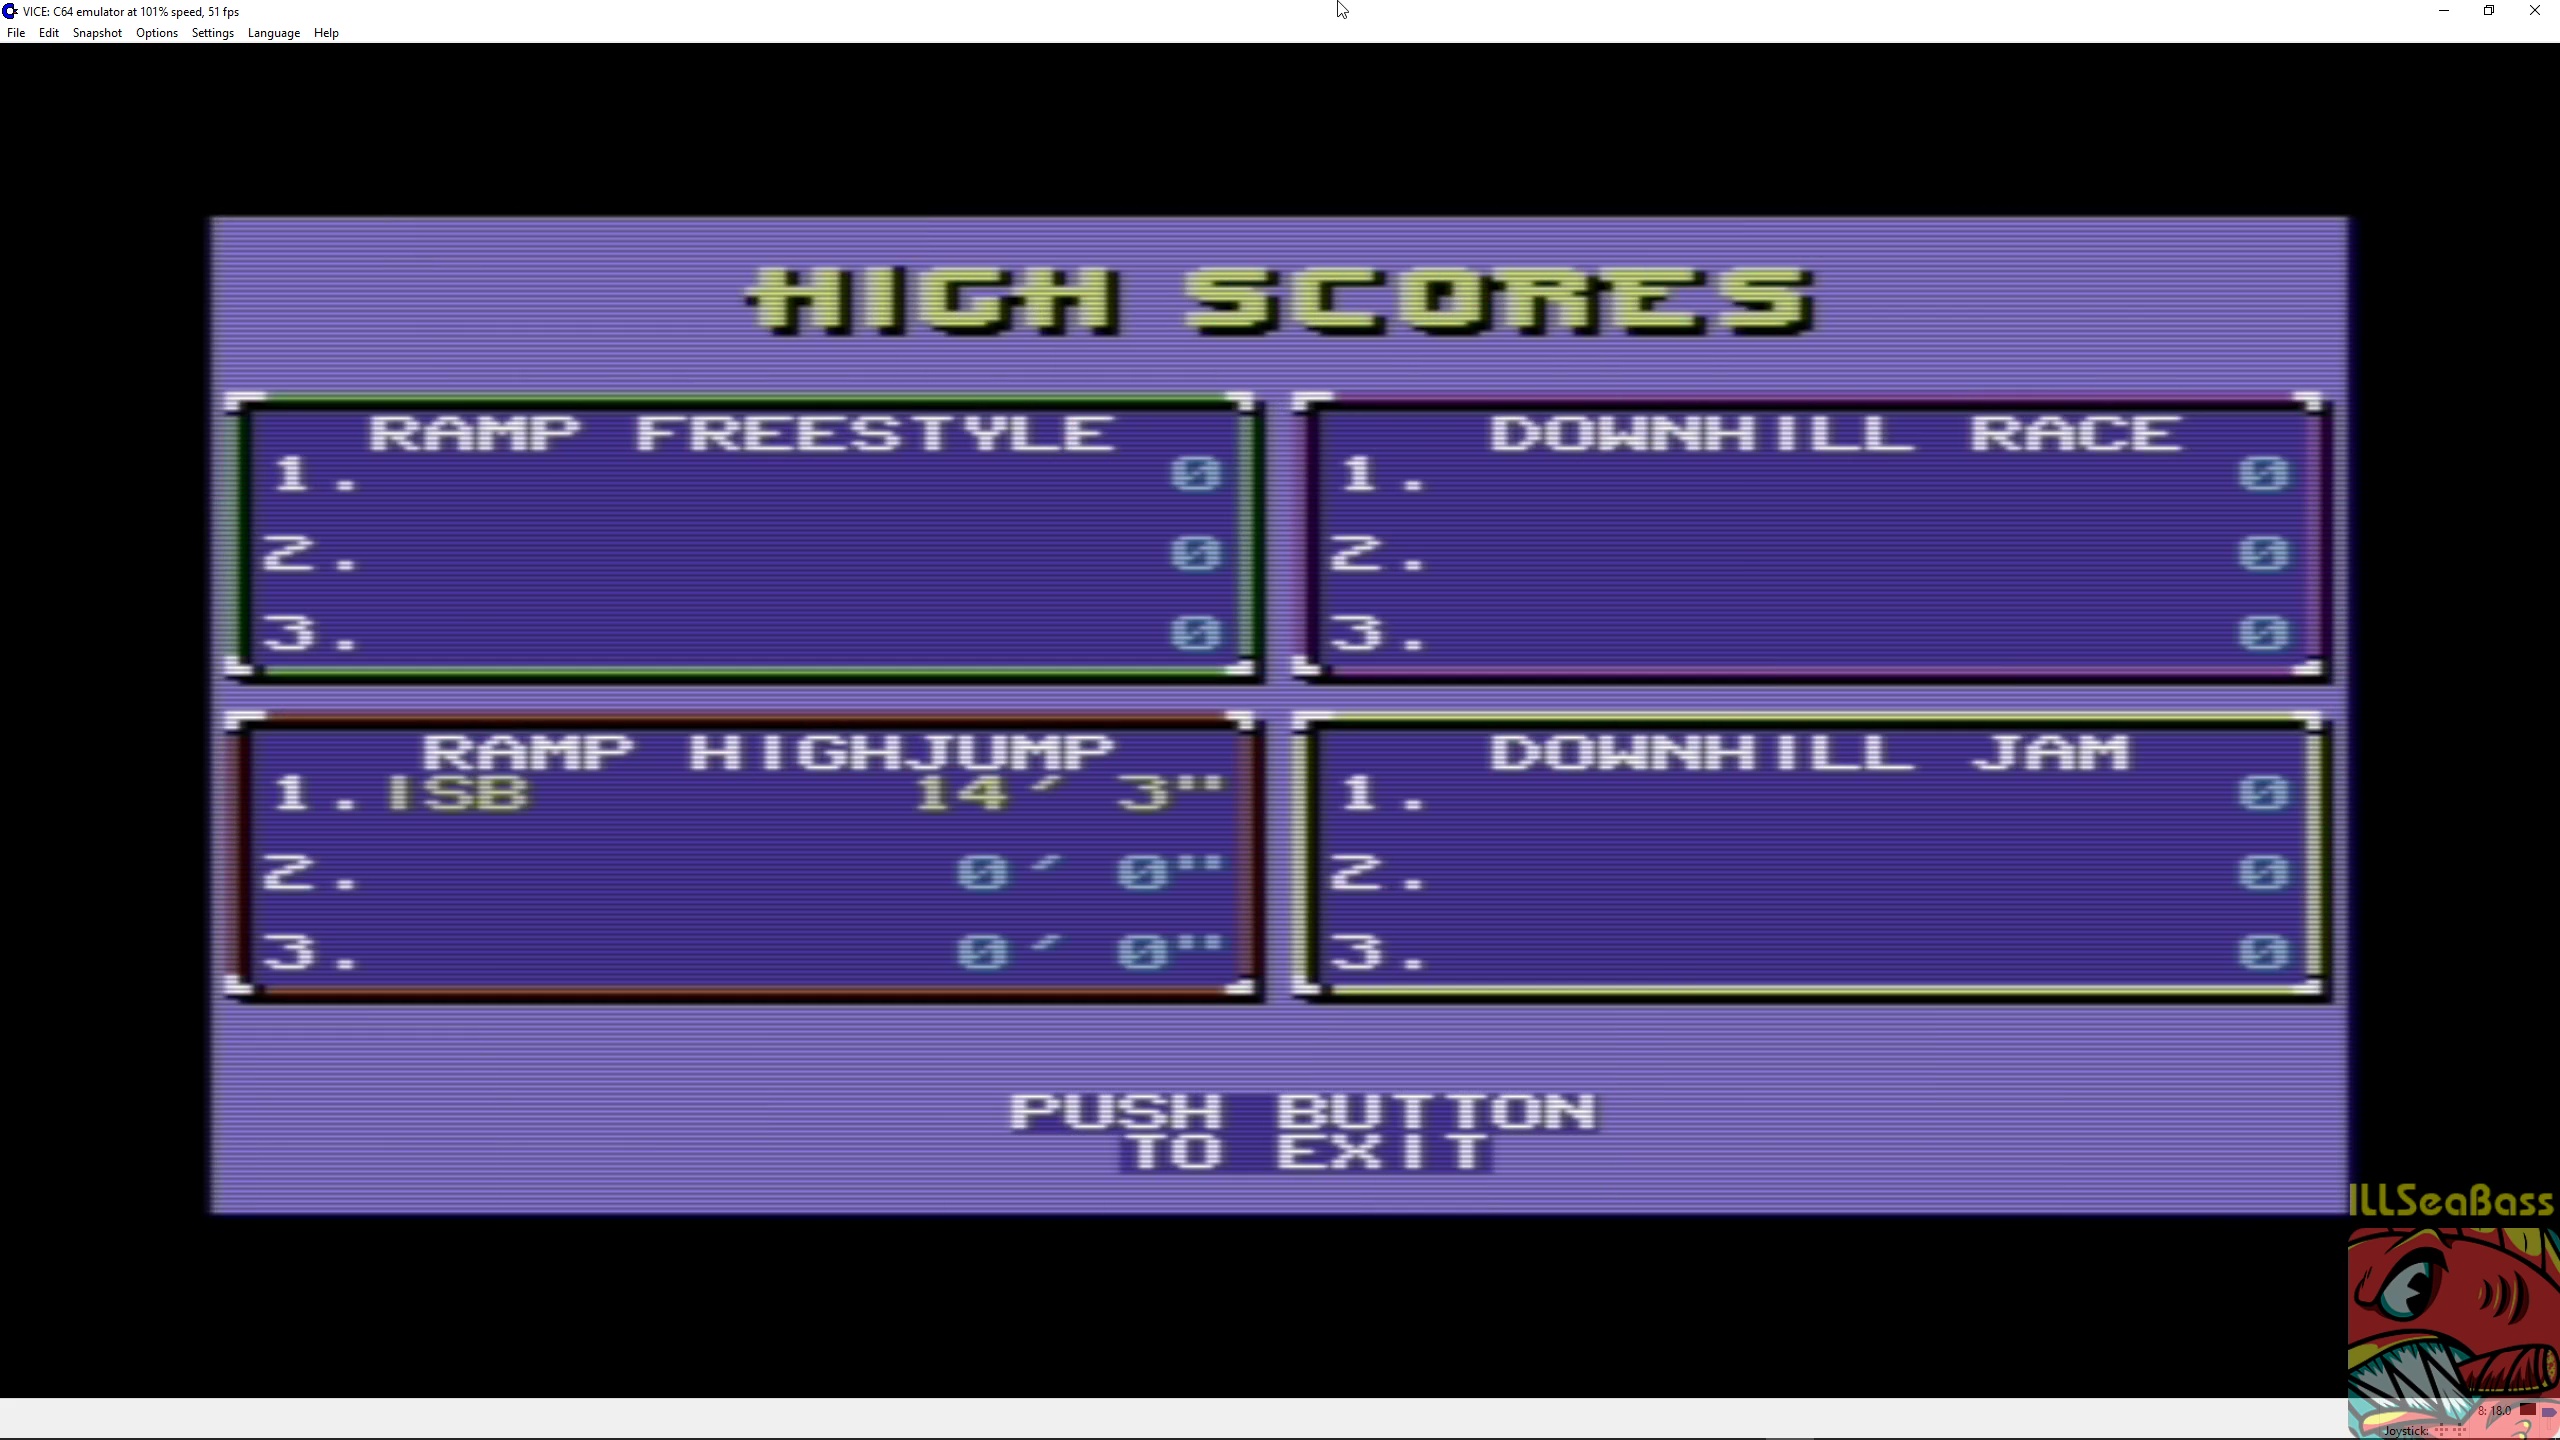 ILLSeaBass: Skate or Die [High Jump] (Commodore 64 Emulated) 171 points on 2018-04-30 22:31:50